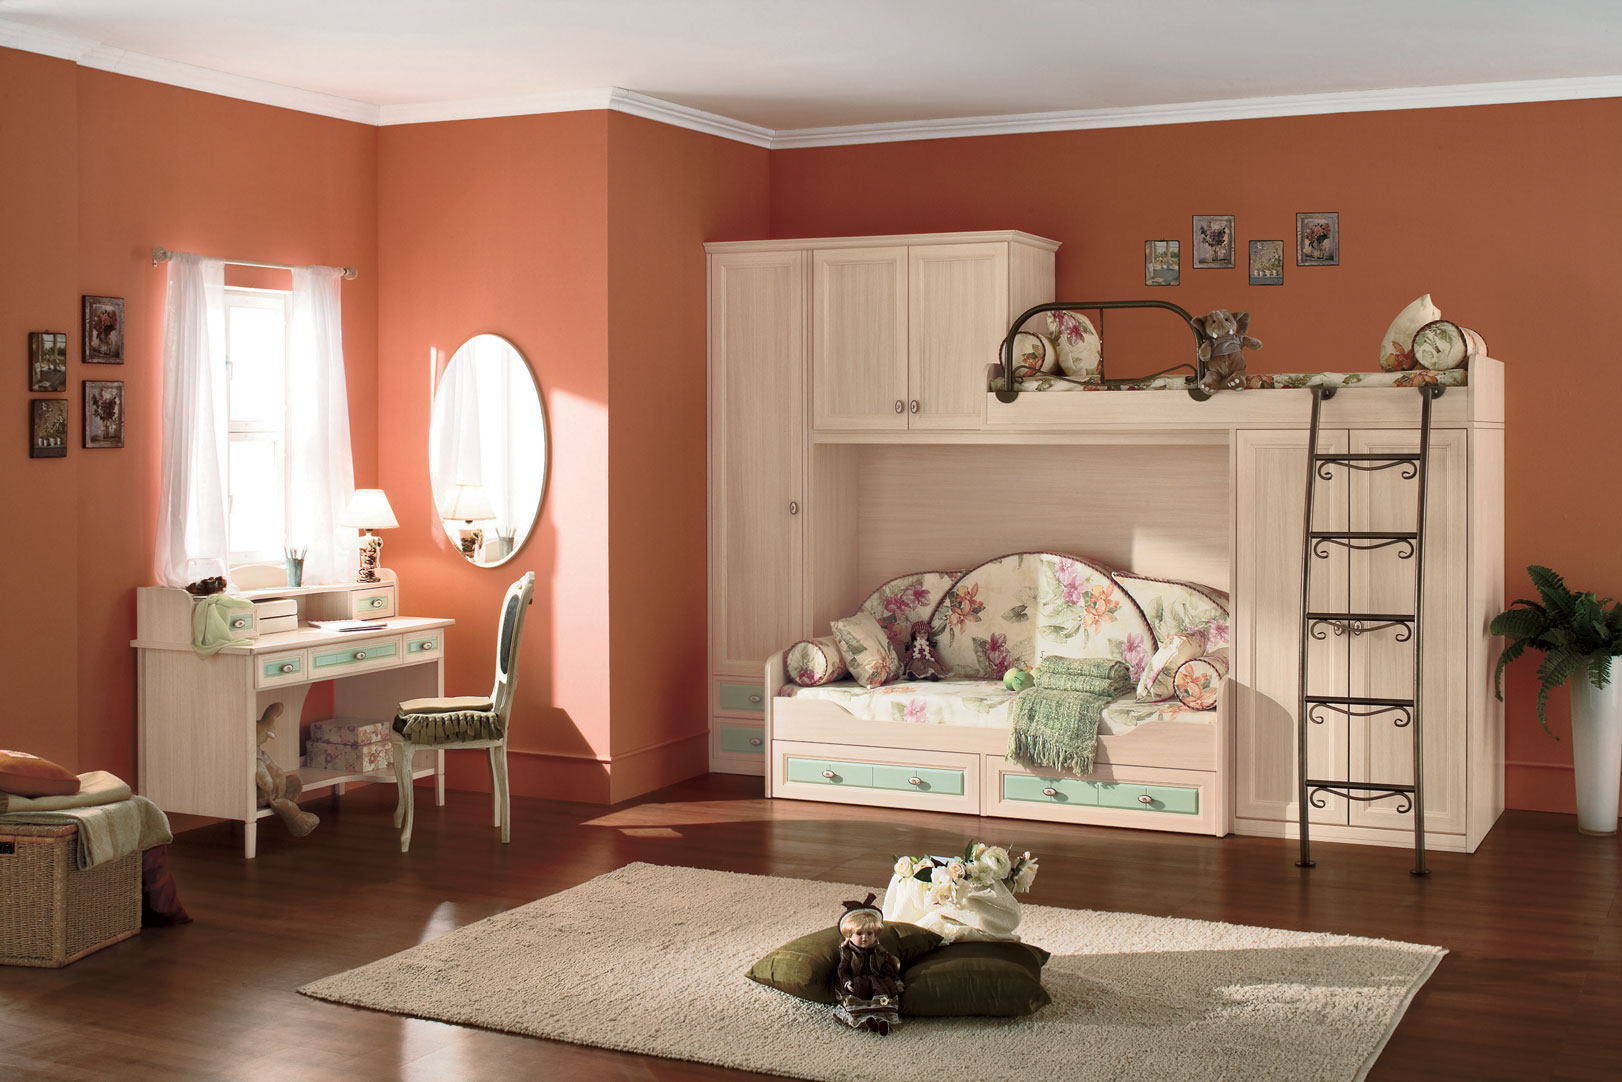 promote: Kid's Rooms From Russian Maker:Akossta